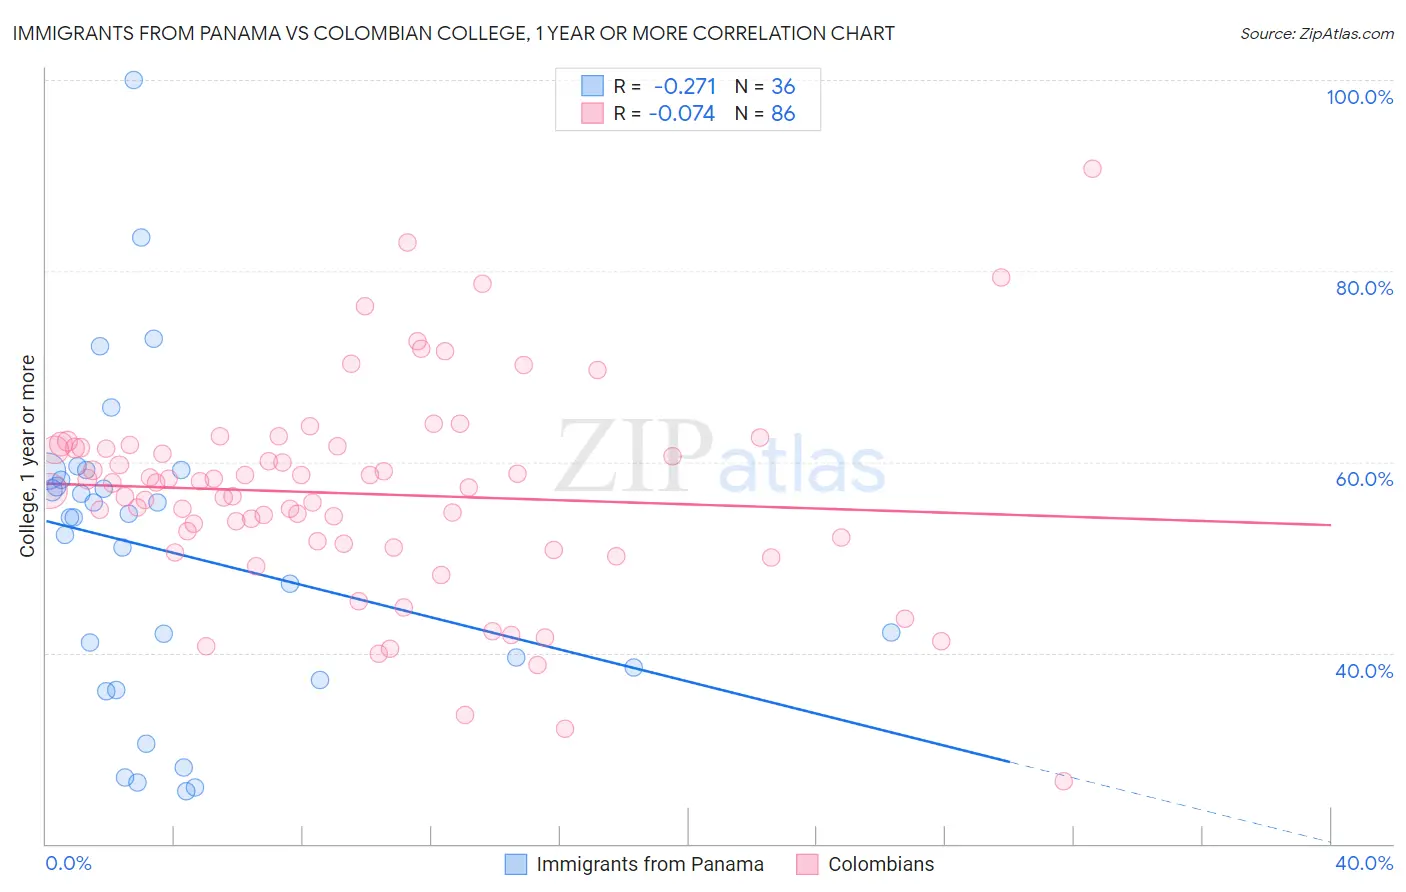 Immigrants from Panama vs Colombian College, 1 year or more